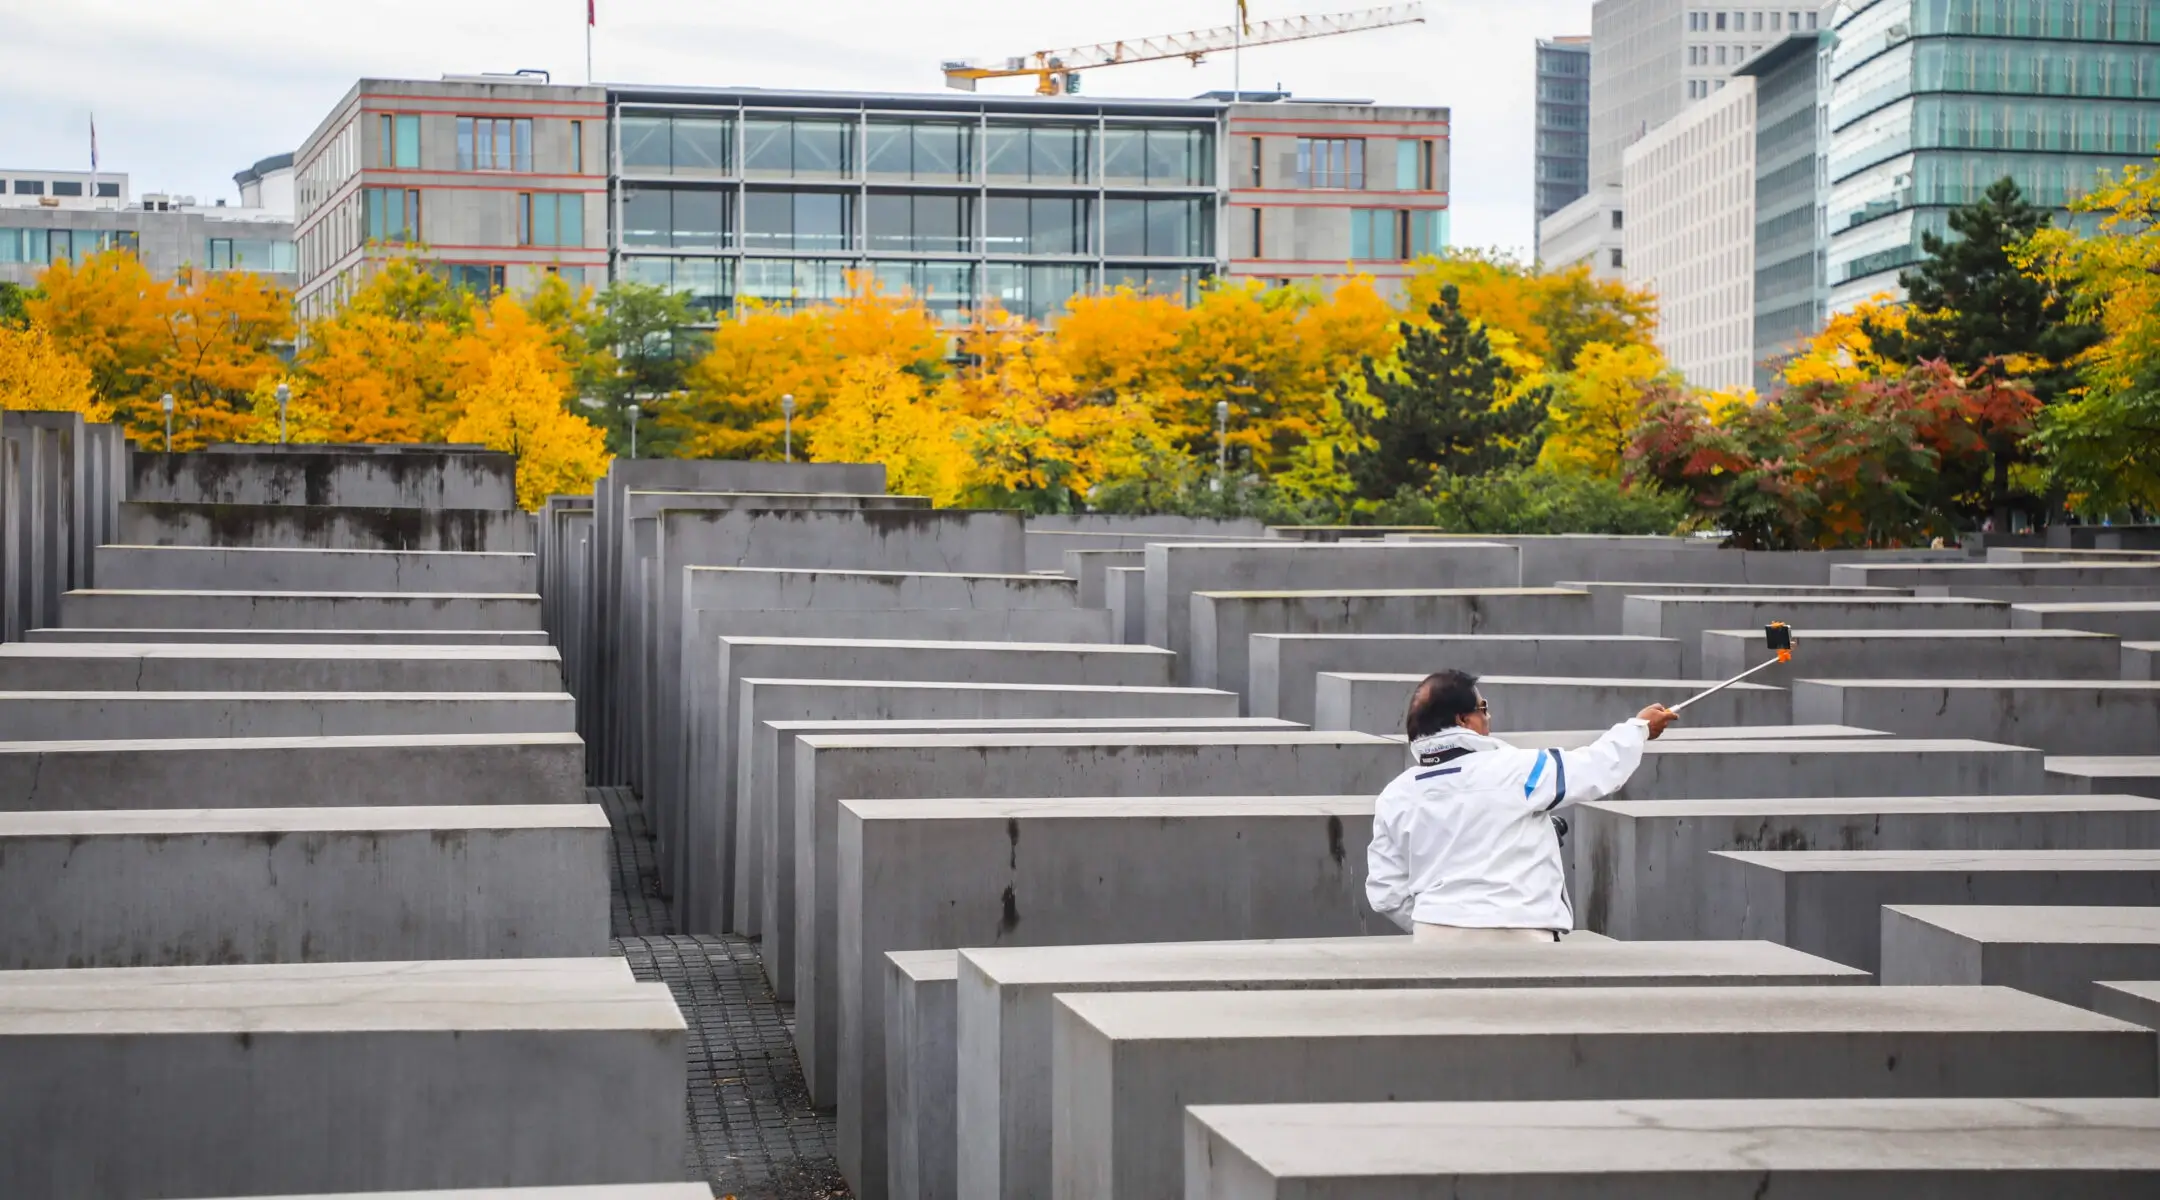 A tourist takes a selfie inside the Memorial To The Murdered Jews Of Europe in Berlin, Sept. 25, 2019.